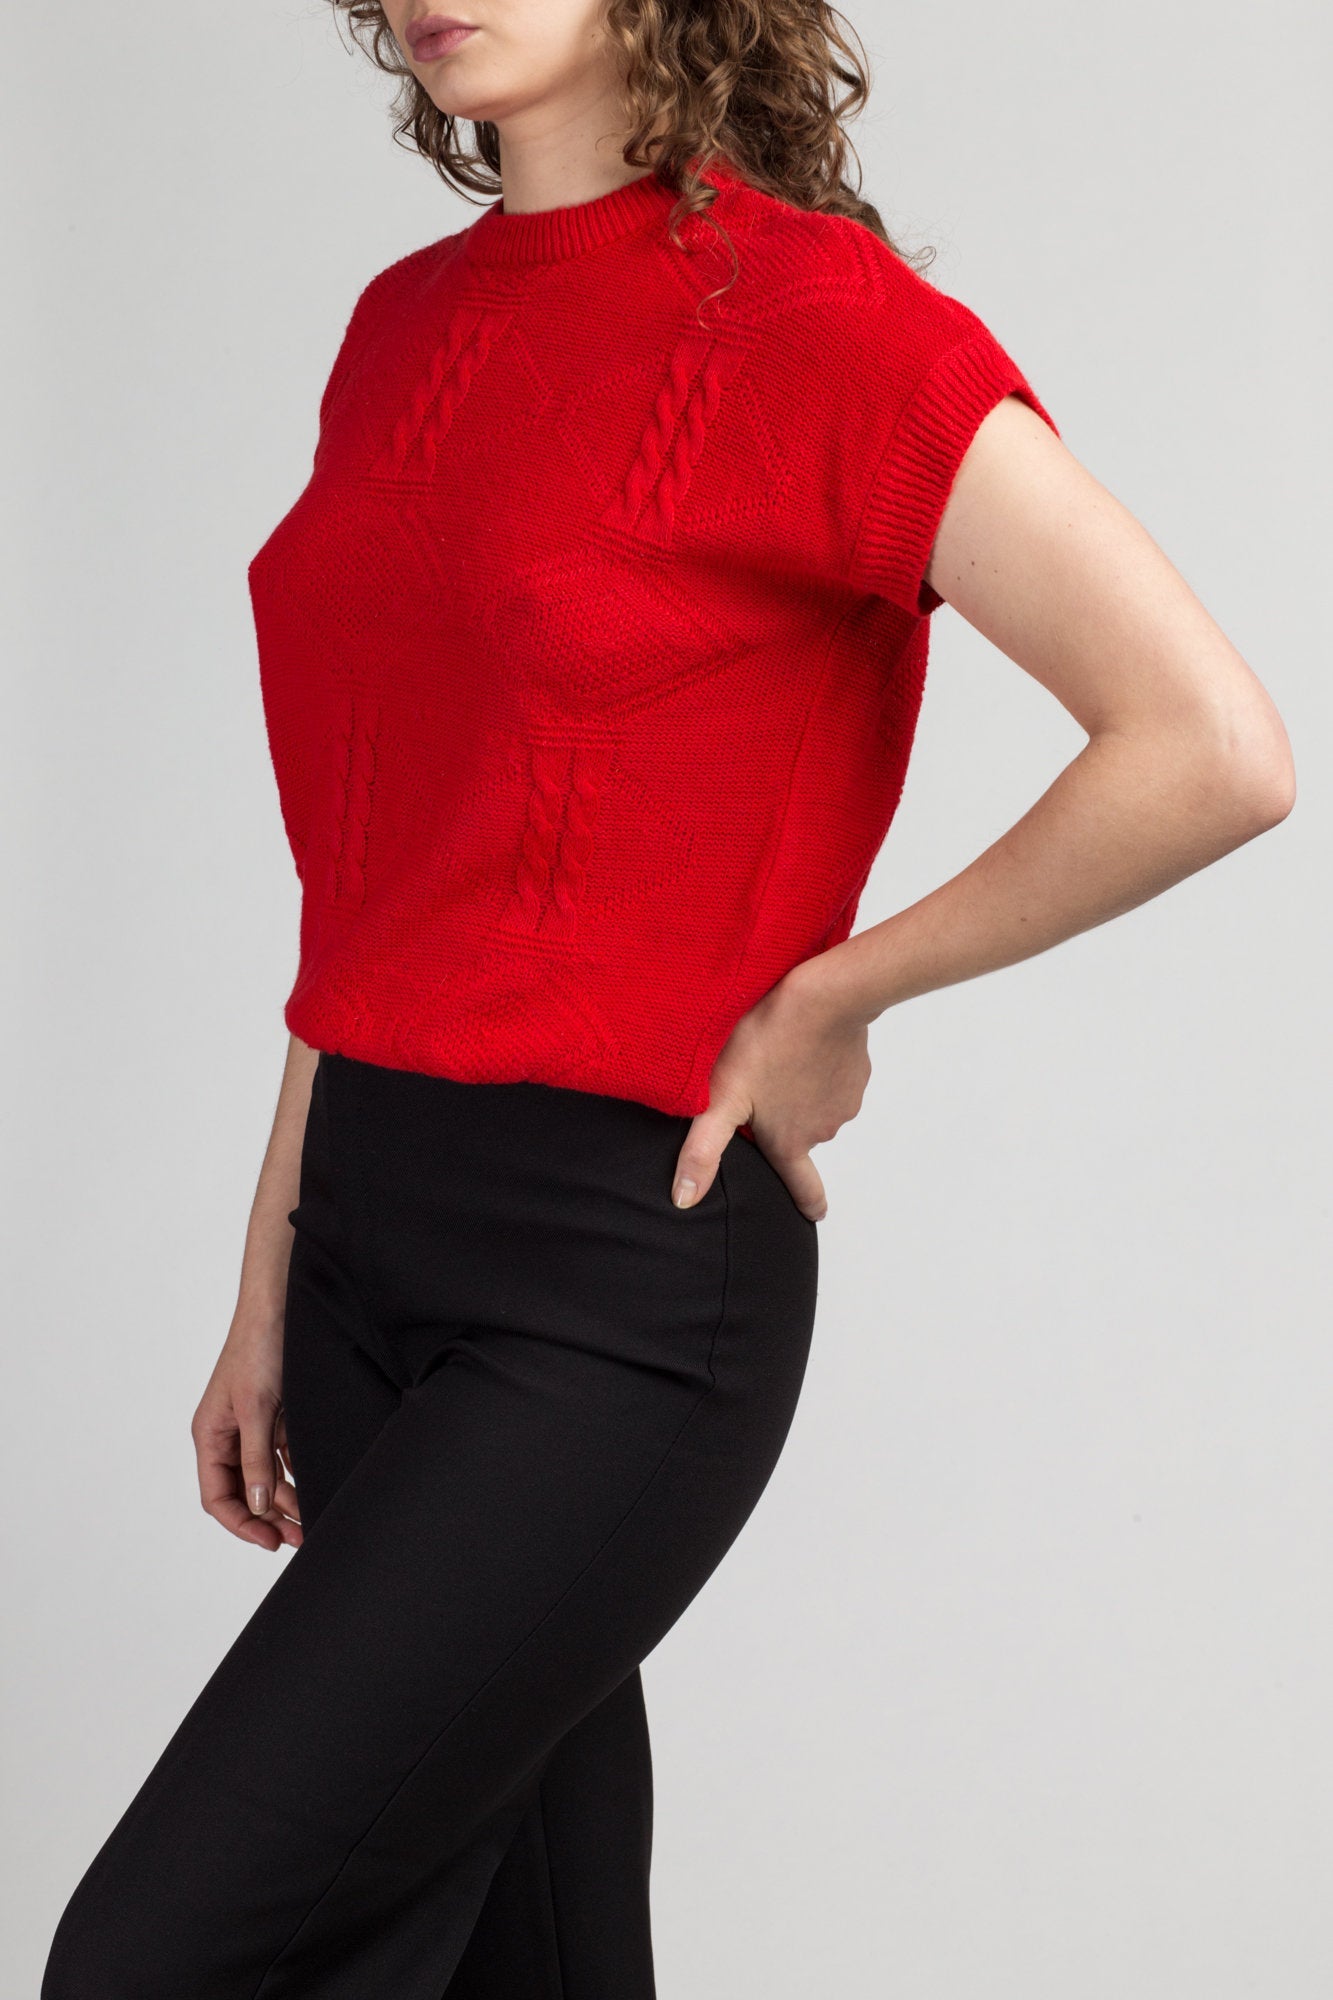 Vintage Red Cable Knit Top - Small to Medium | 80s Plain Cap Sleeve Knit Sweater